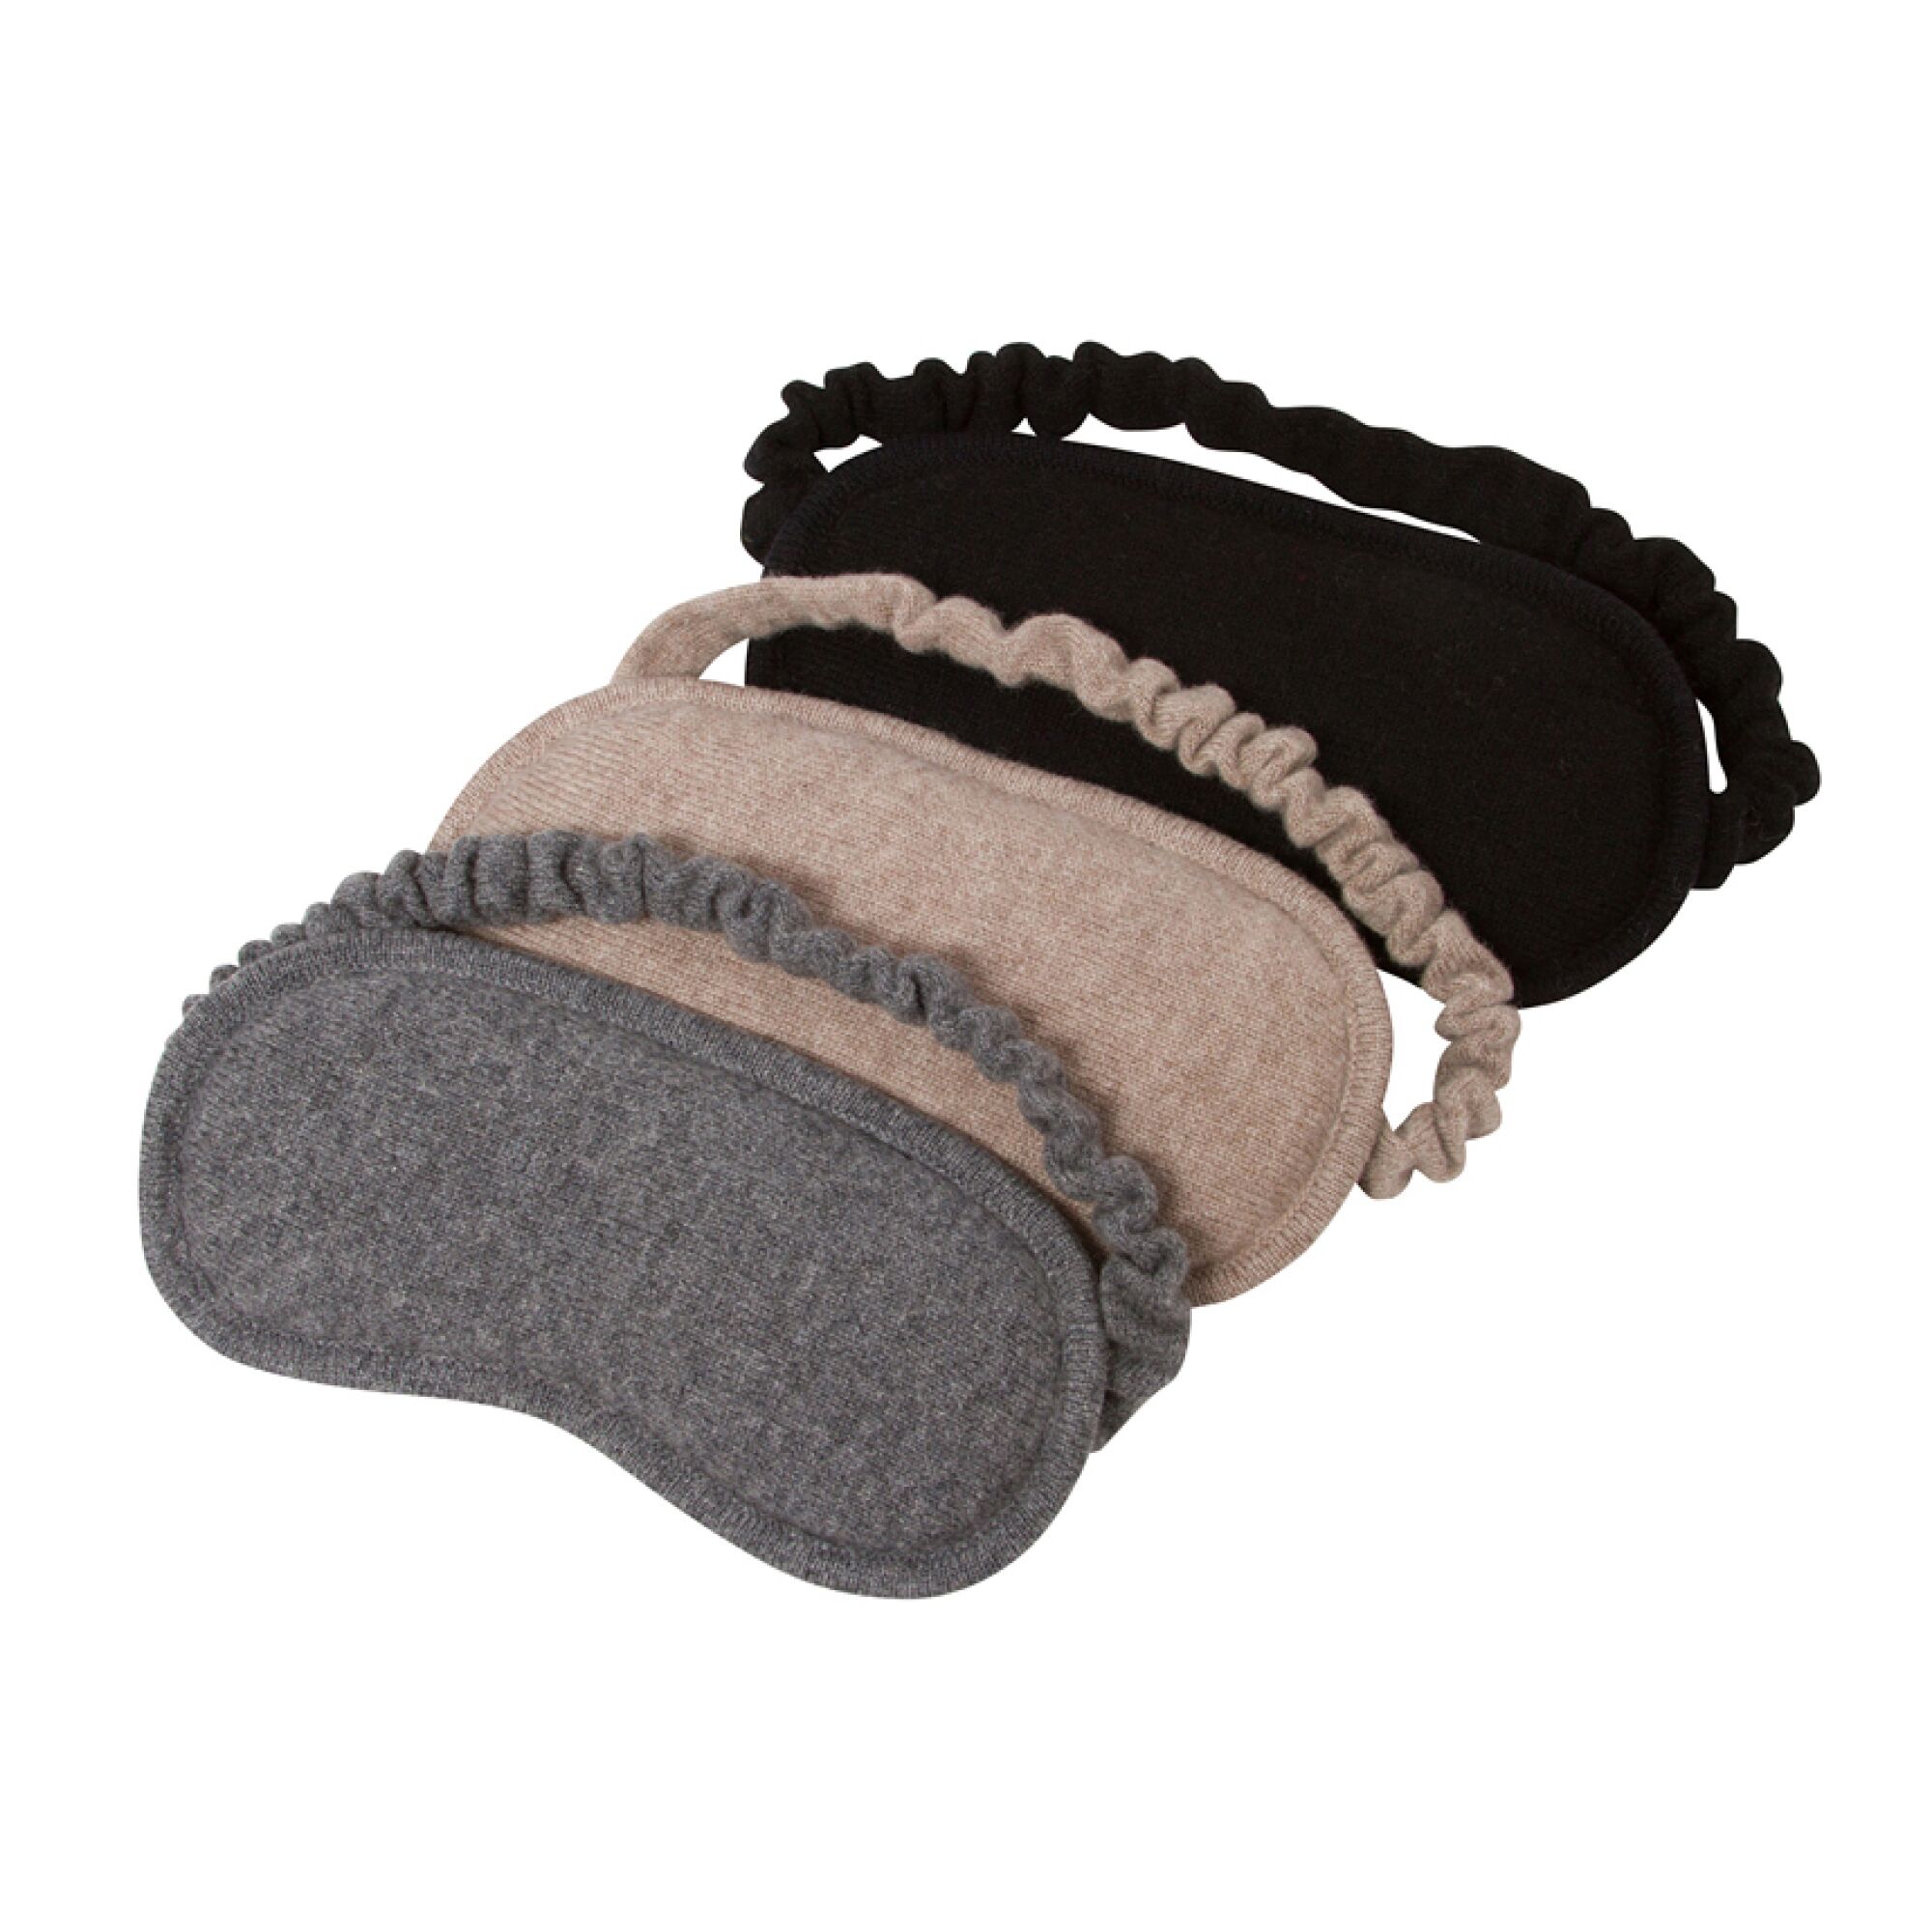 Knitted, pure cashmere eye masks